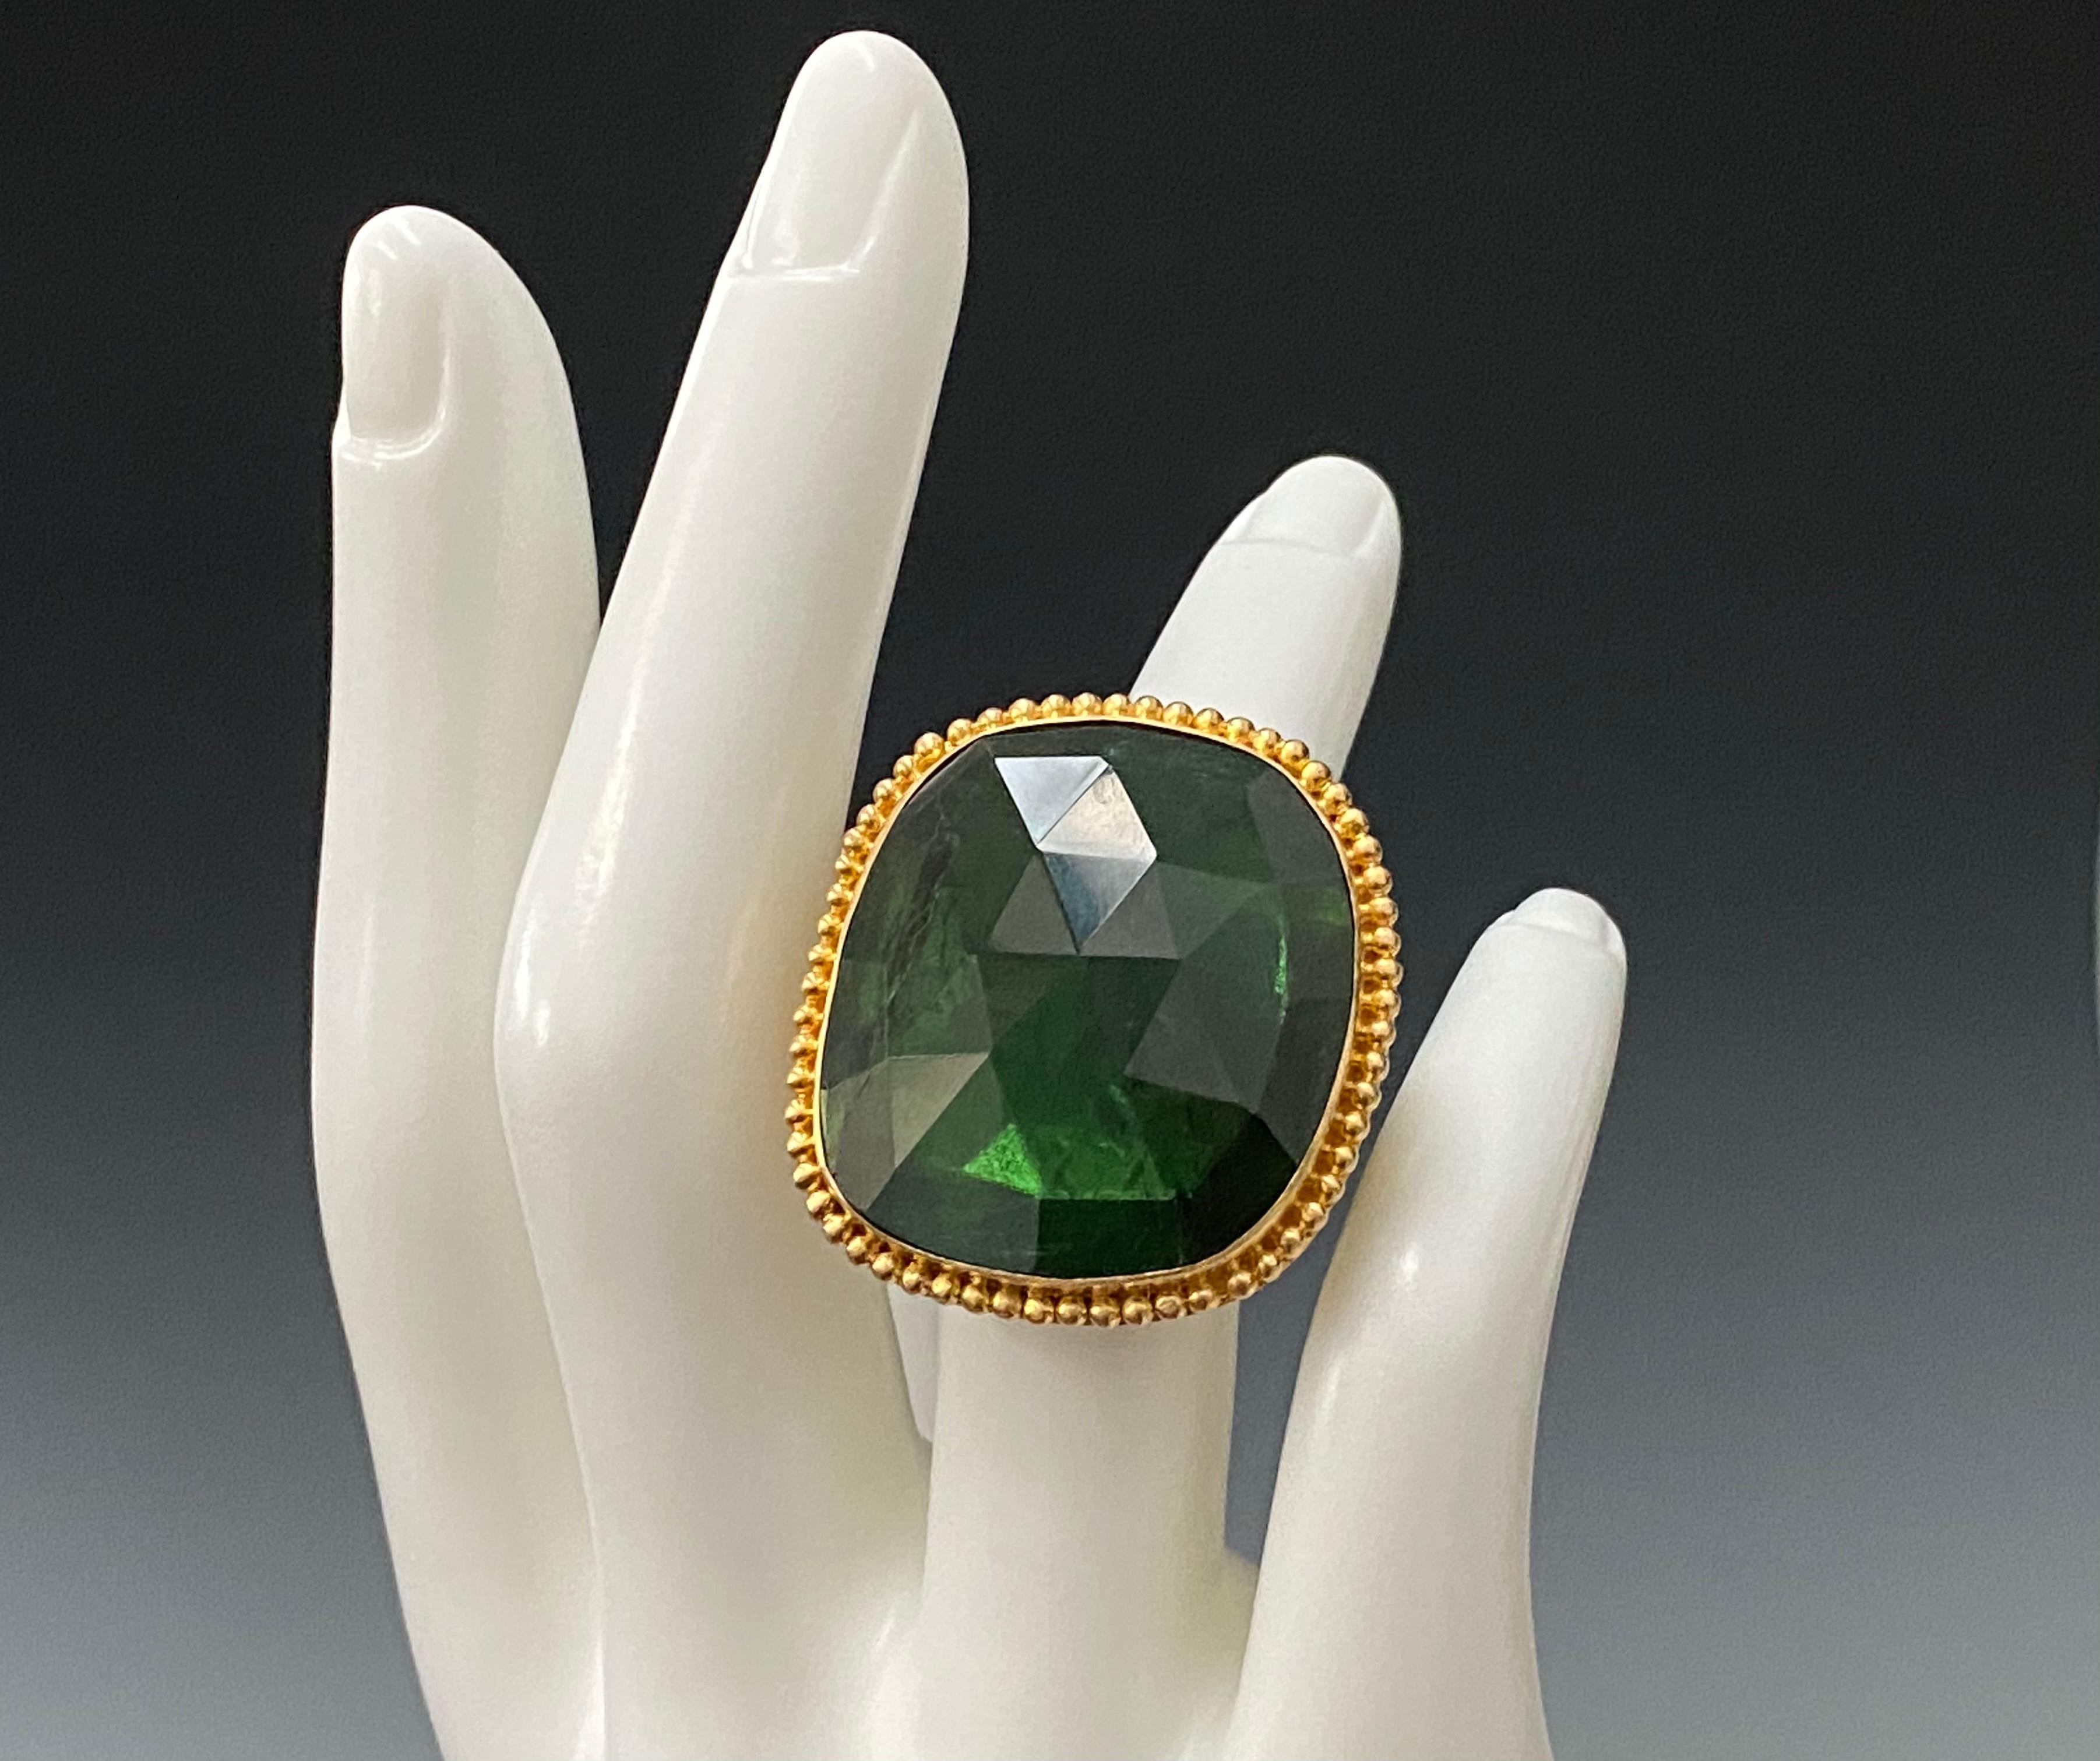 A large 26 x 28 mm irregular rose-cut Brazilian green tourmaline slice is surrounded by large granulated 